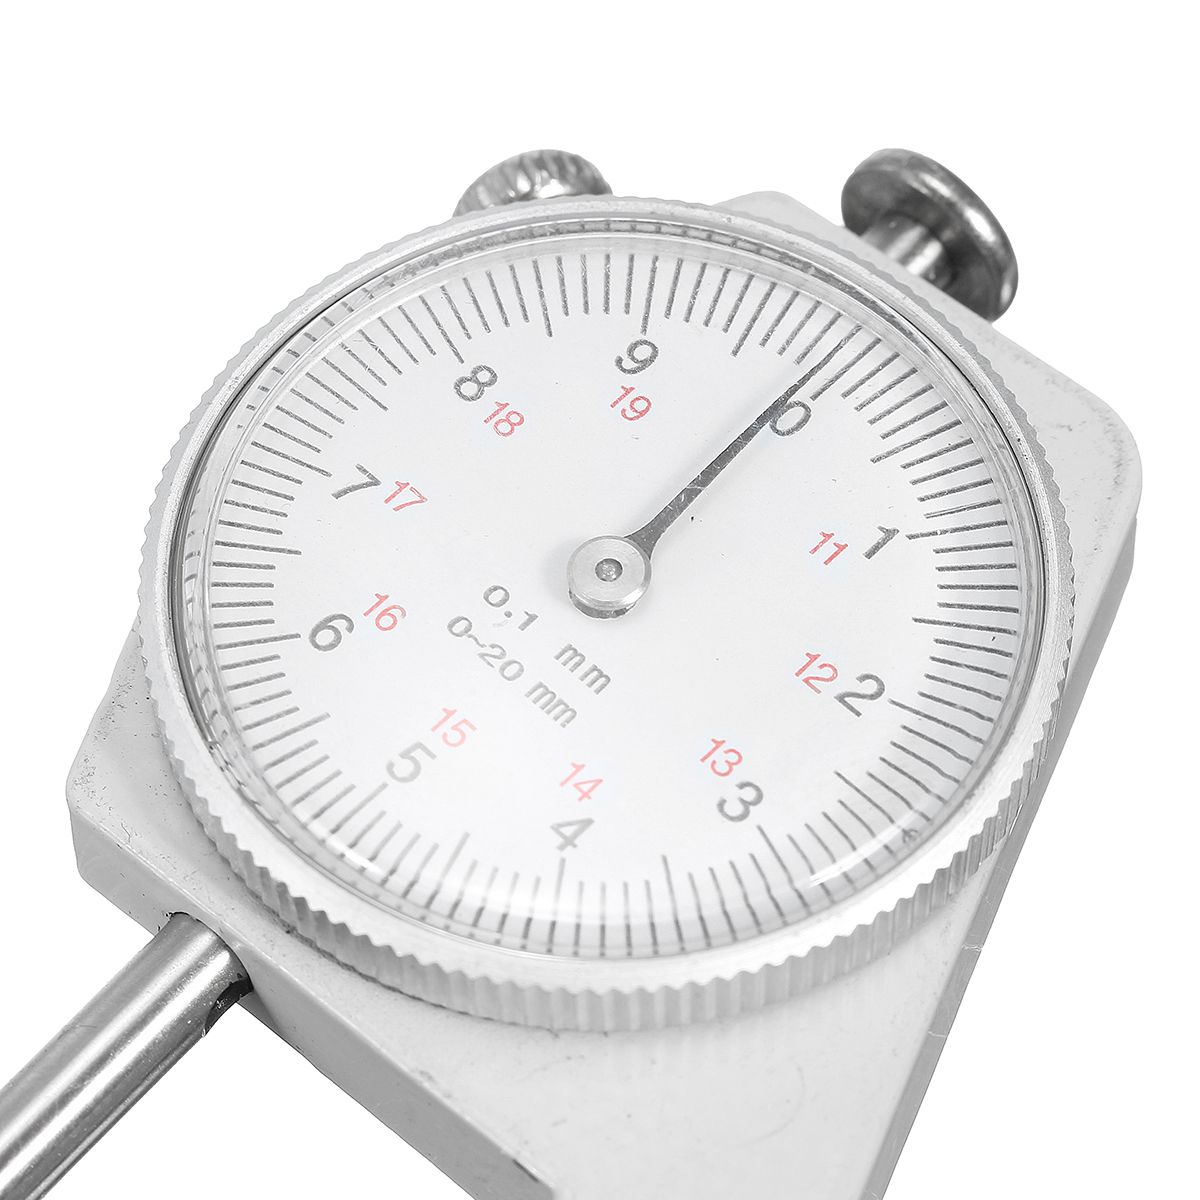 0-20mm-Metal-Leather-Craft-Toll-Thickness-Gauge-Measure-Tester-Dial-1403025